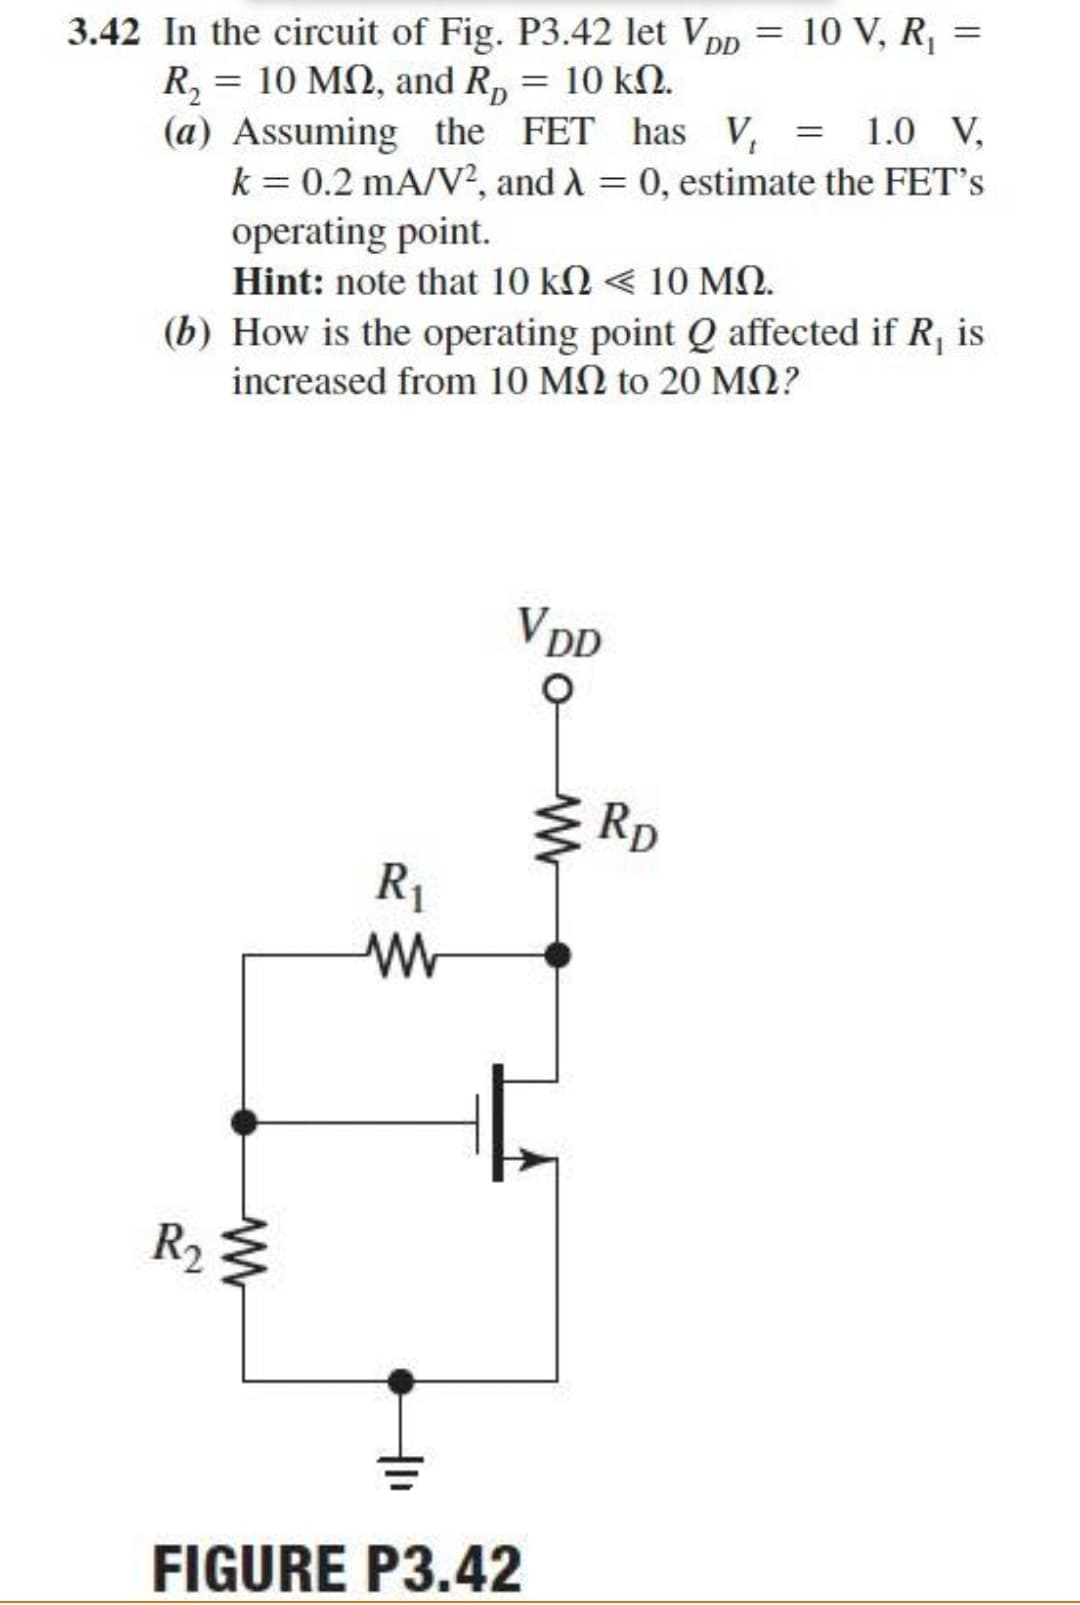 =
3.42 In the circuit of Fig. P3.42 let VDD
R₂ = 10 MQ, and R₂ = 10 kn.
10 V, R₁ =
(a) Assuming the FET has V₁ = 1.0 V,
k = 0.2 mA/V², and λ = 0, estimate the FET's
operating point.
Hint: note that 10 ΚΩ < 10 ΜΩ.
(b) How is the operating point Q affected if R, is
increased from 10 ΜΩ to 20 ΜΩ?
VDD
R₁
www
R₂ ≤
FIGURE P3.42
M
RD